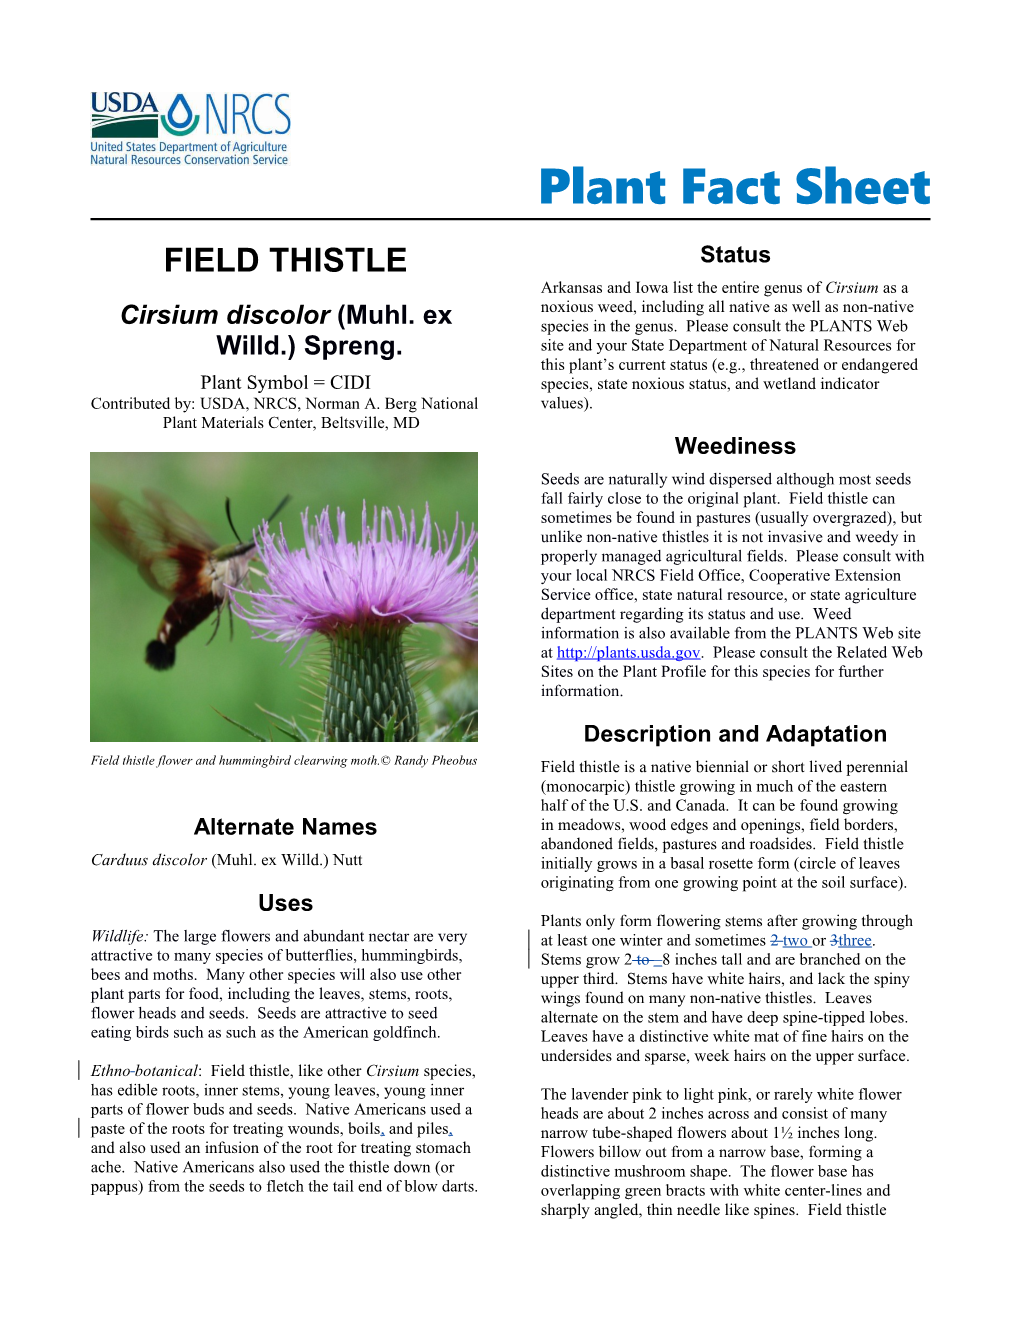 Field Thistle (Cirsium Discolor), Plant Fact Sheet